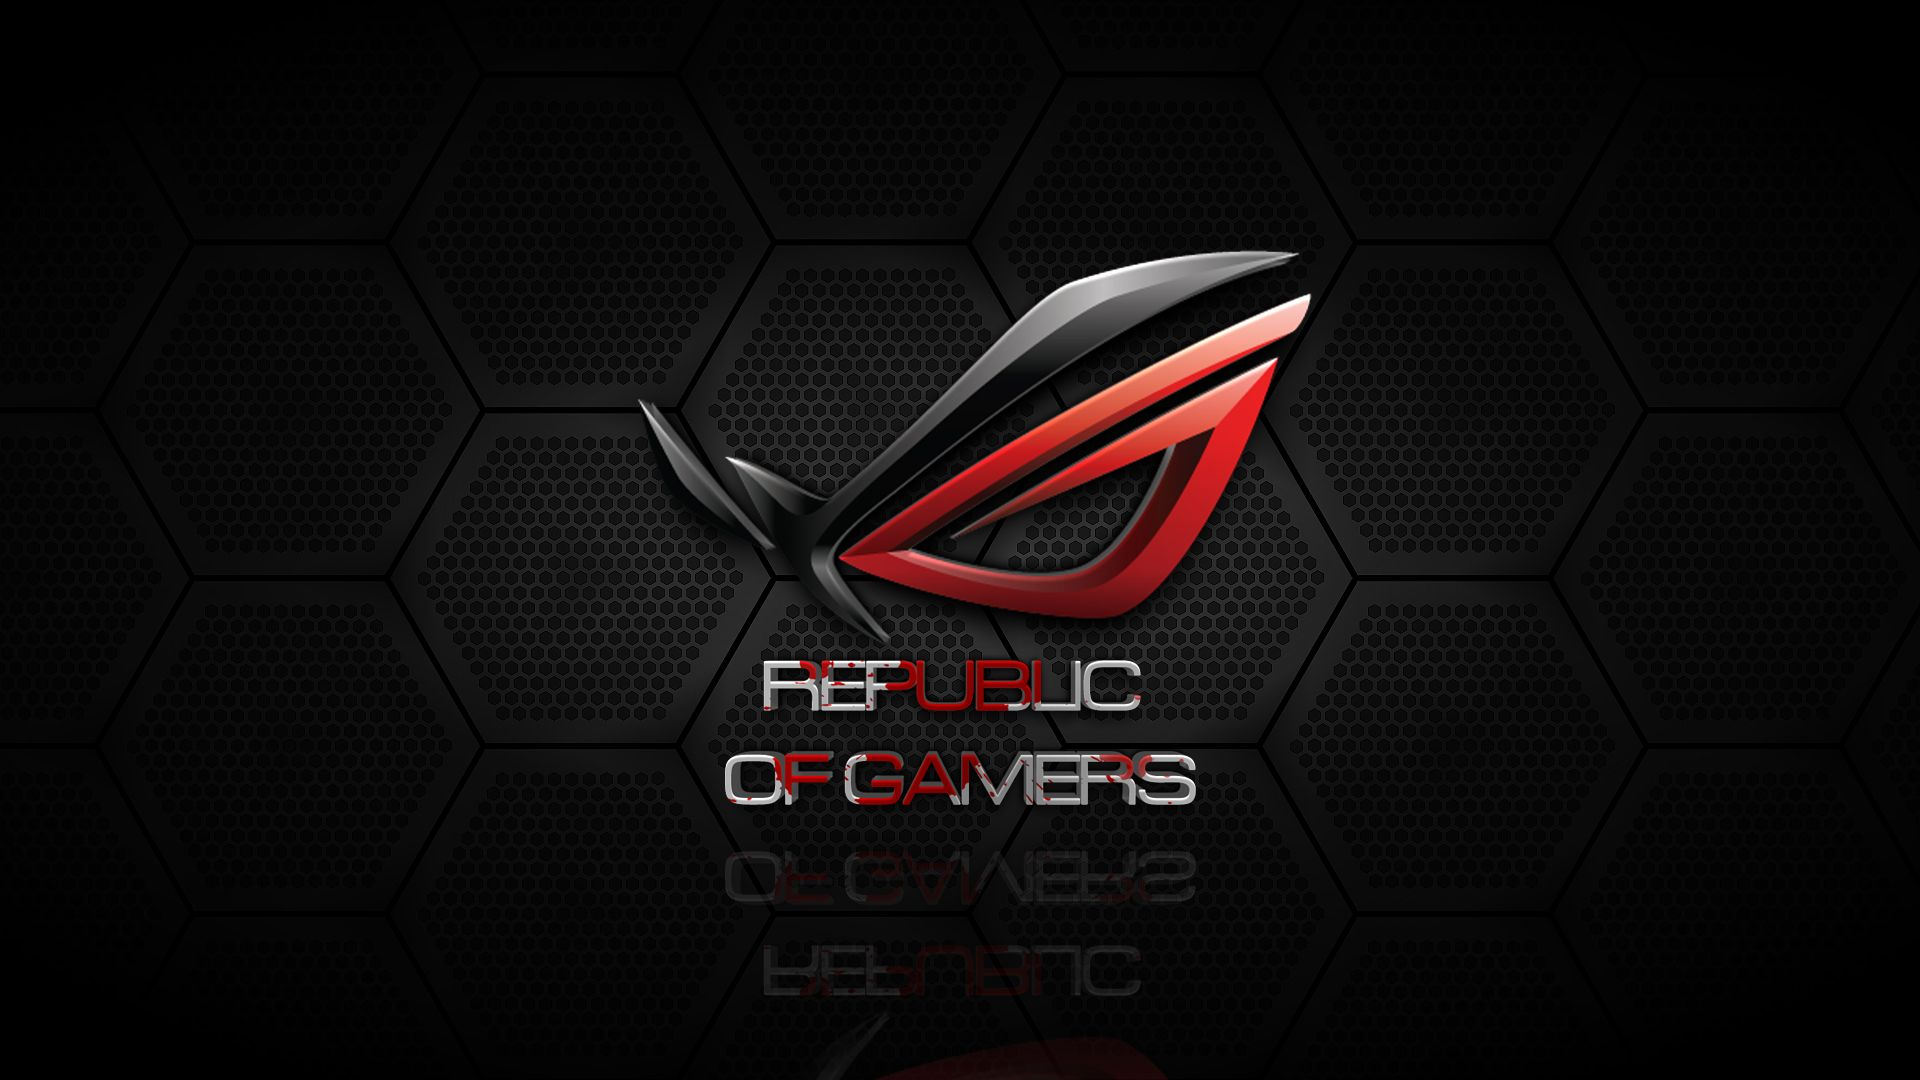 1920x1080 Black And Red Republic Of Gamers Asus RoG Wallpaper Id #1217 Download Page | Asus rog, Asus, 4k wallpapers for pc